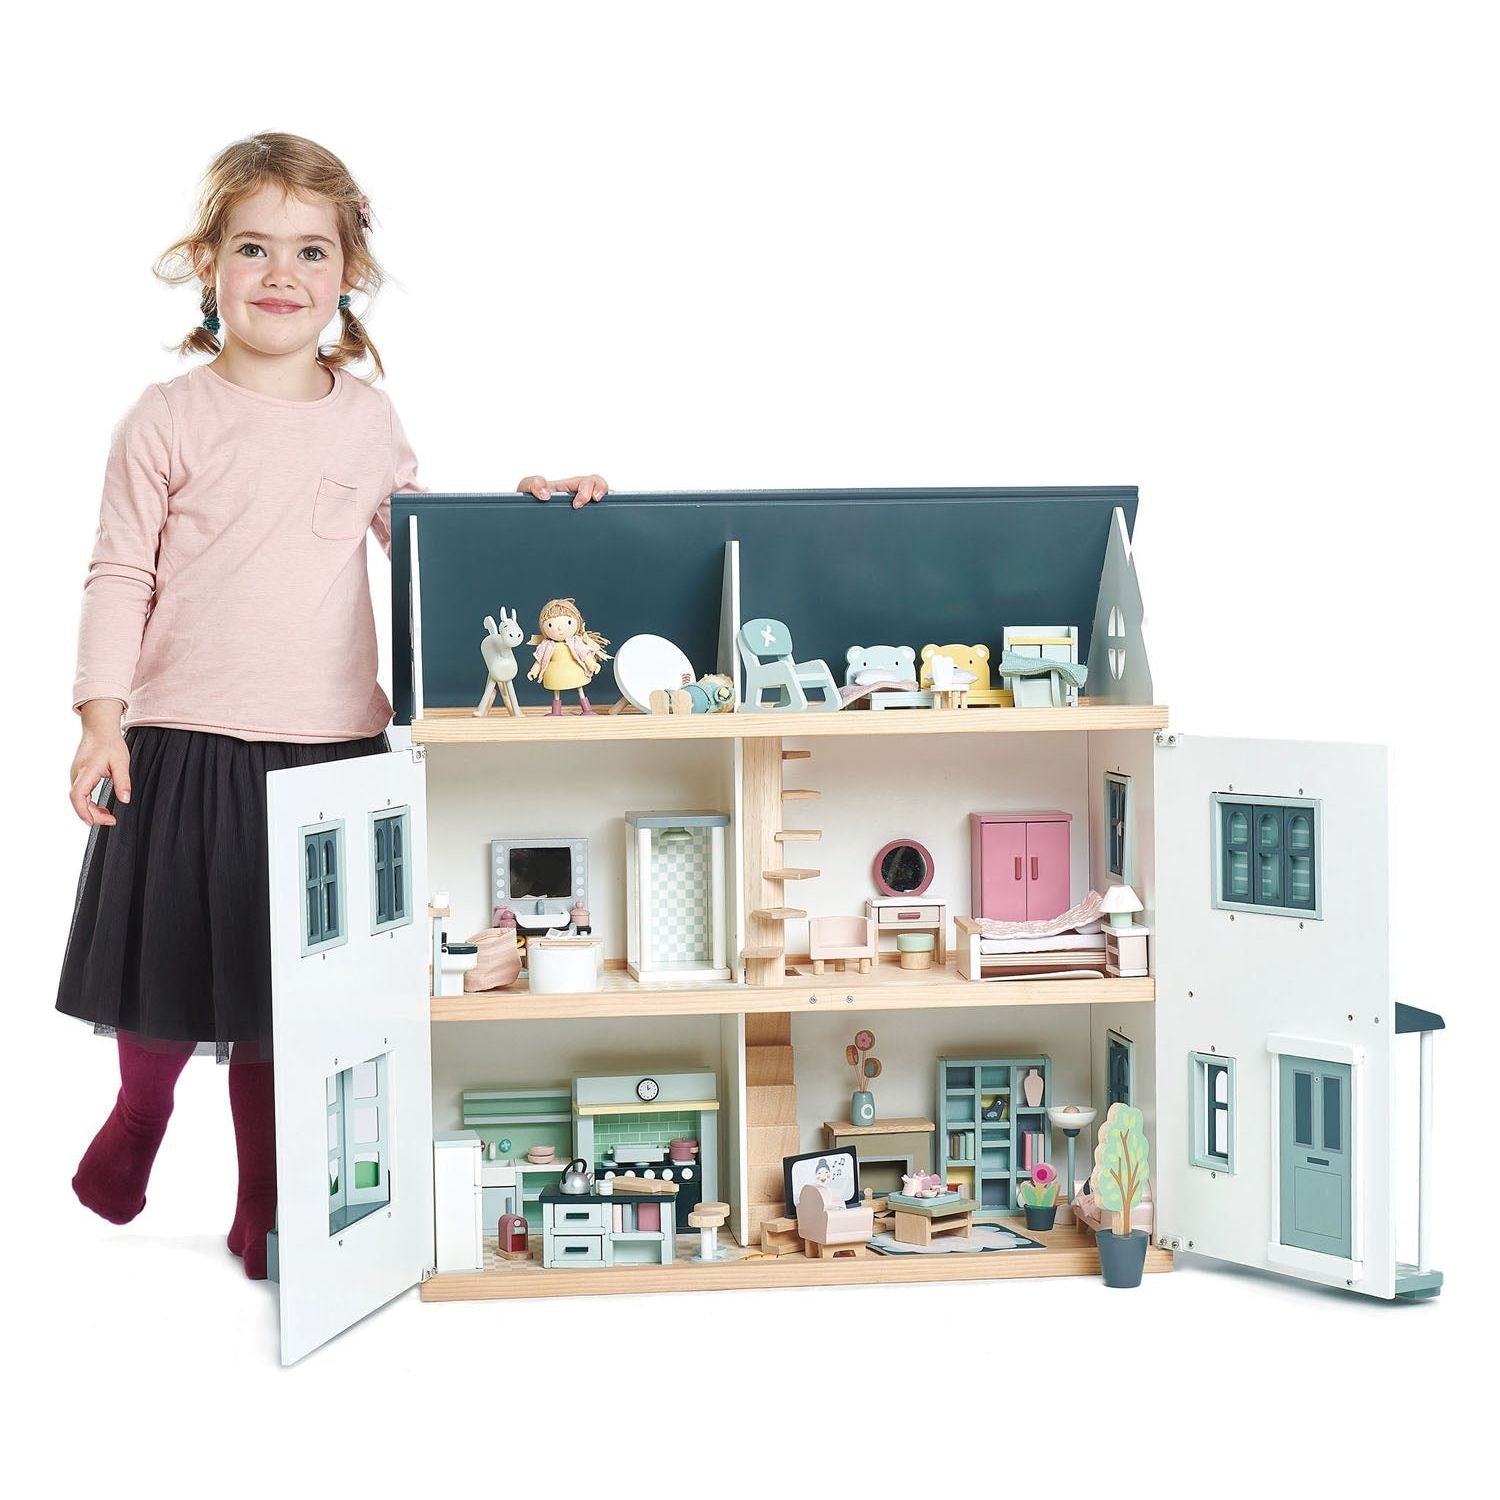 Dolls House Bathroom Furniture - The Online Toy Shop - Dollhouse Accessories - 2